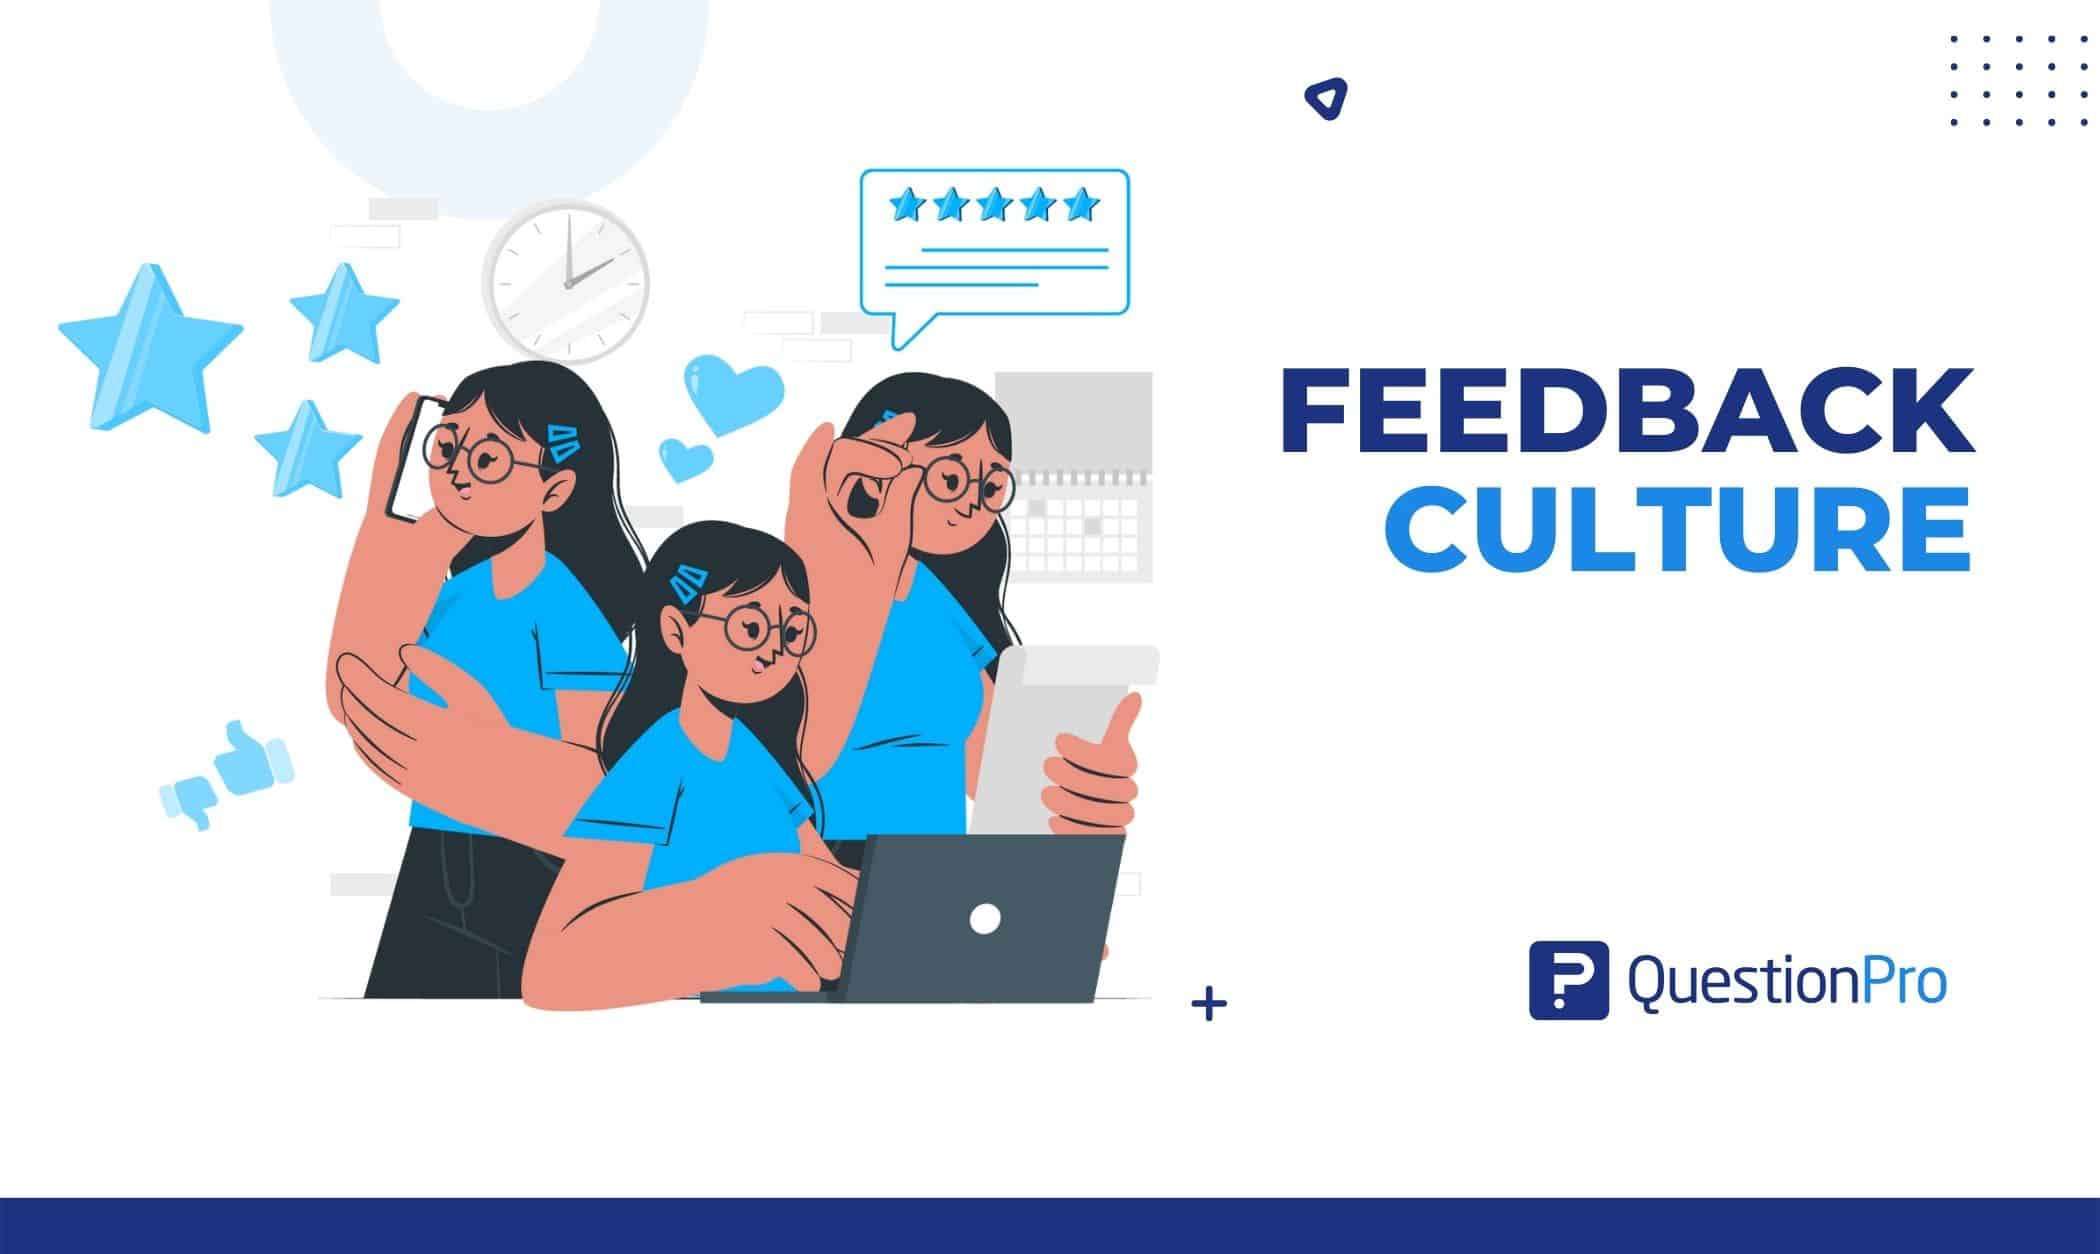 A feedback culture boosts workplace communication by promoting inclusiveness and collaboration. Let's discuss 10 techniques in this article.